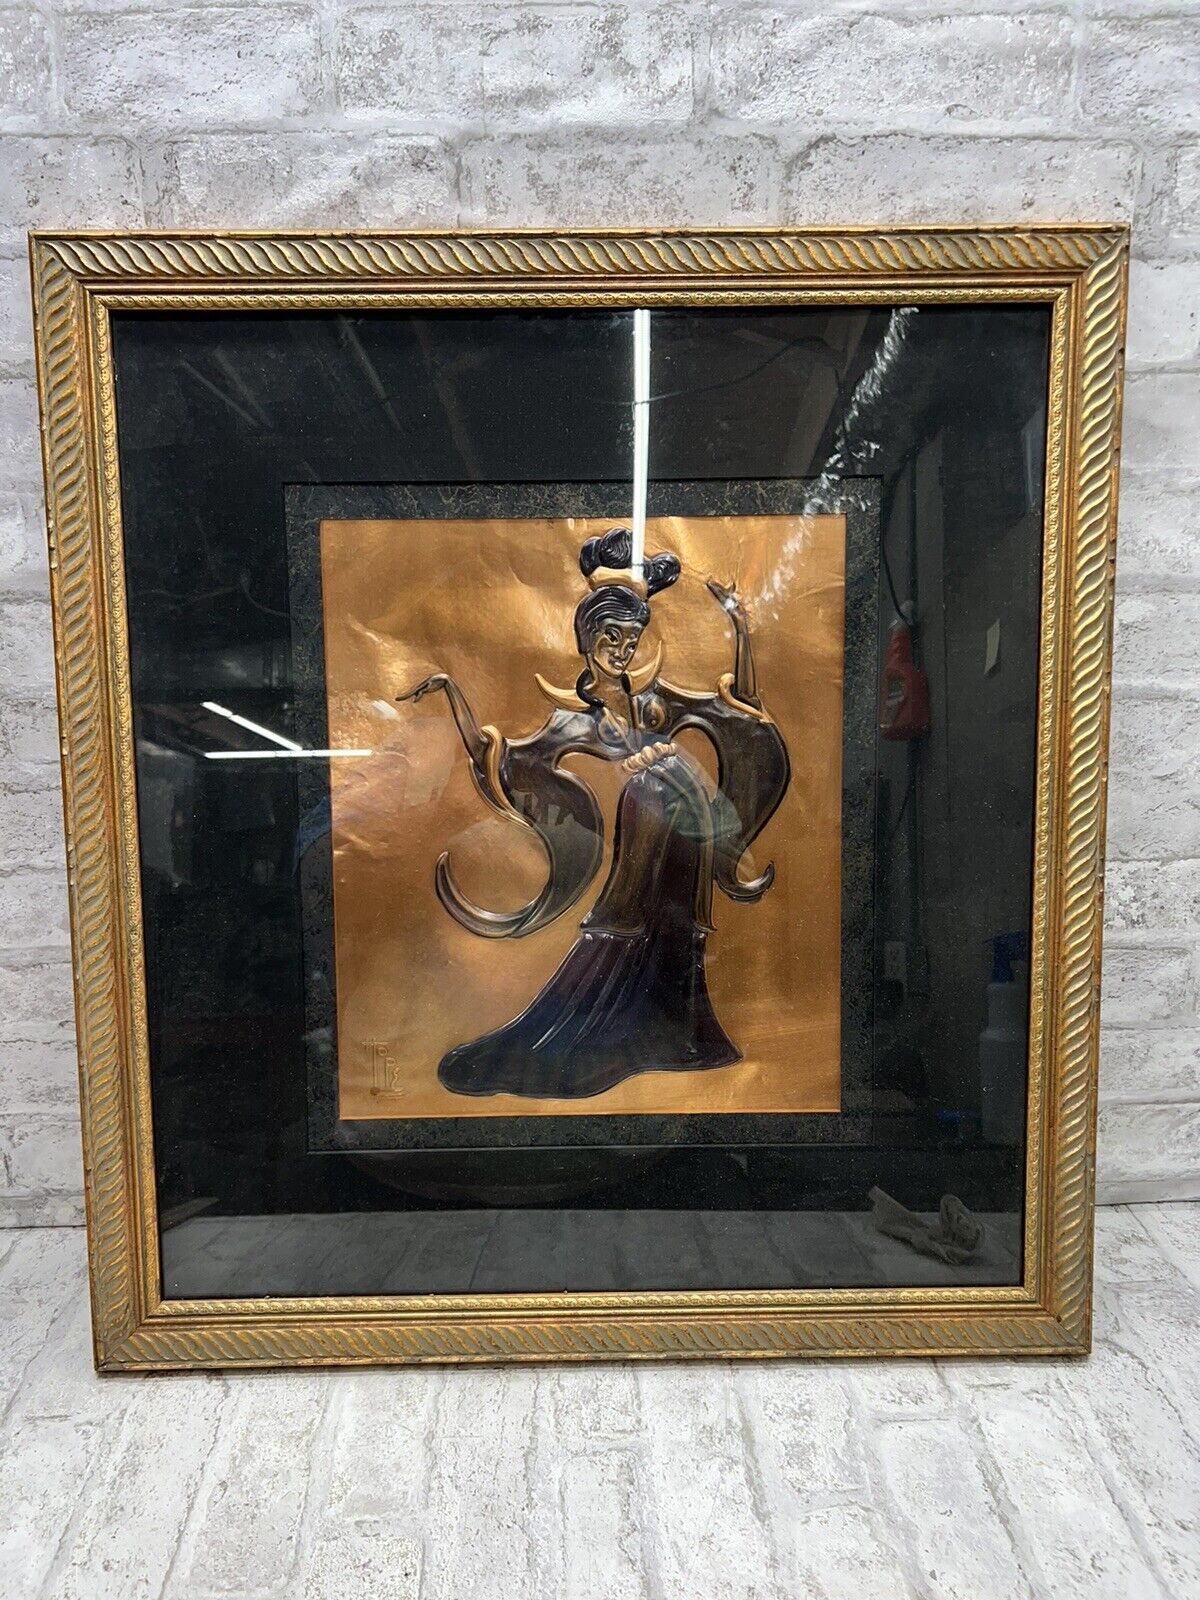 Rare Art Deco MCM Copper Art Asian Dancing Lady Wall Hanging Signed Hope Framed